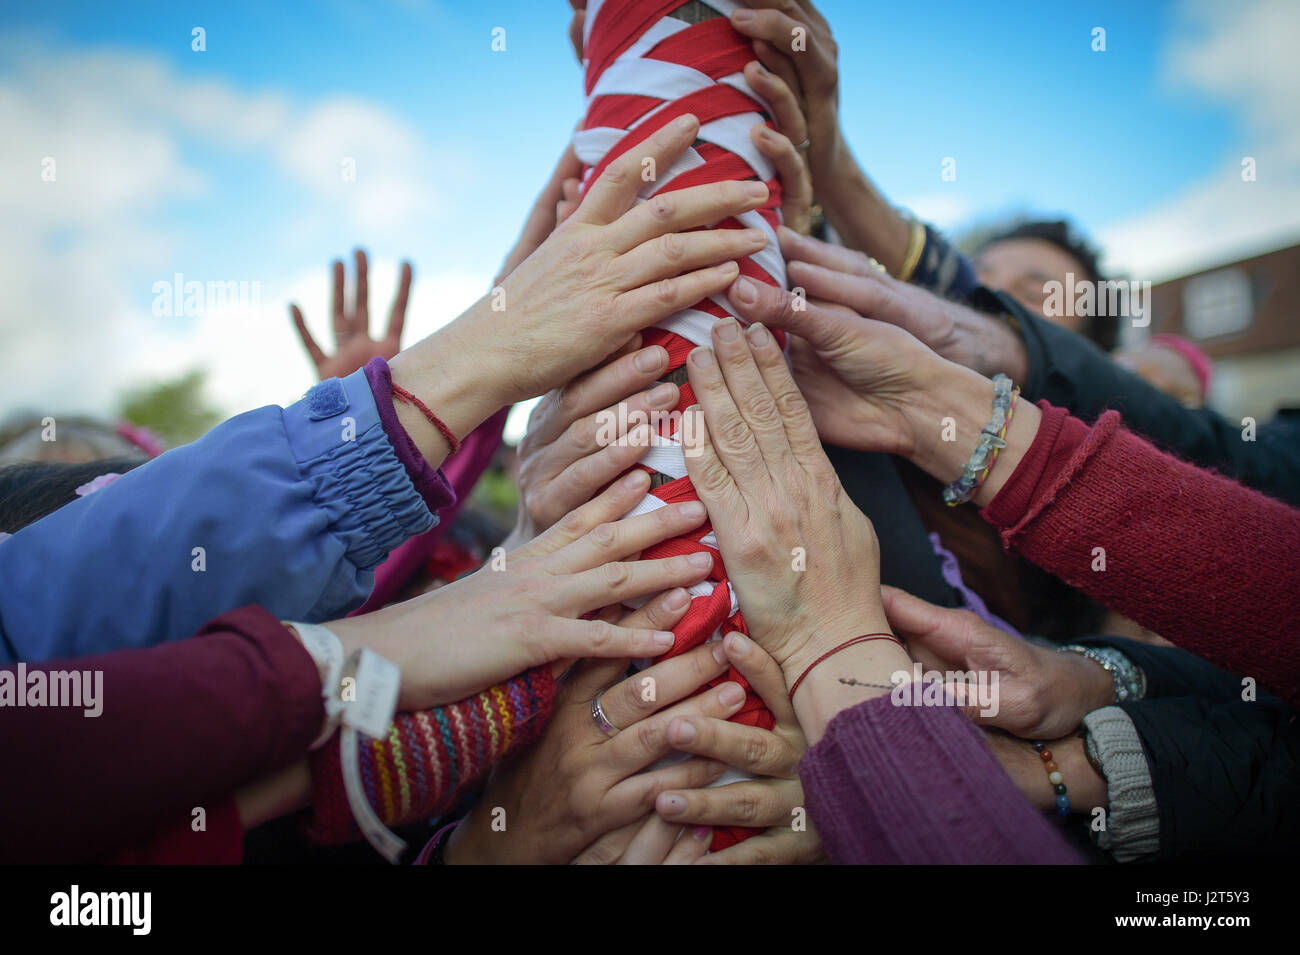 Hands touch the maypole at the Chalice Well, Glastonbury, where Beltane festivities are taking place on May Day. Stock Photo